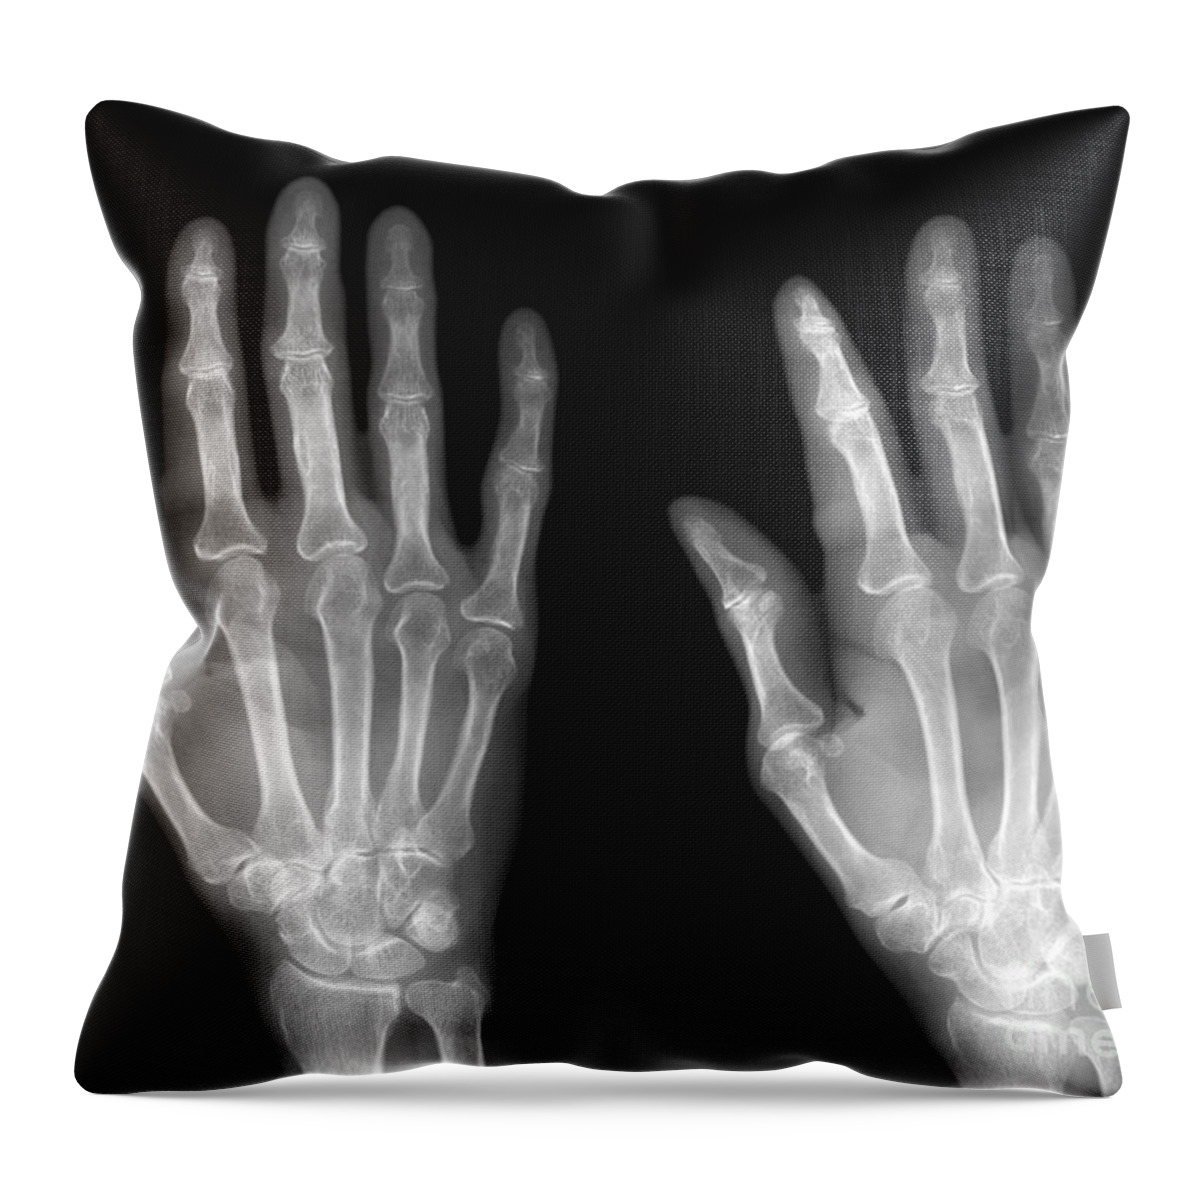 Hand Throw Pillow featuring the photograph Normal Hand #1 by Ted Kinsman